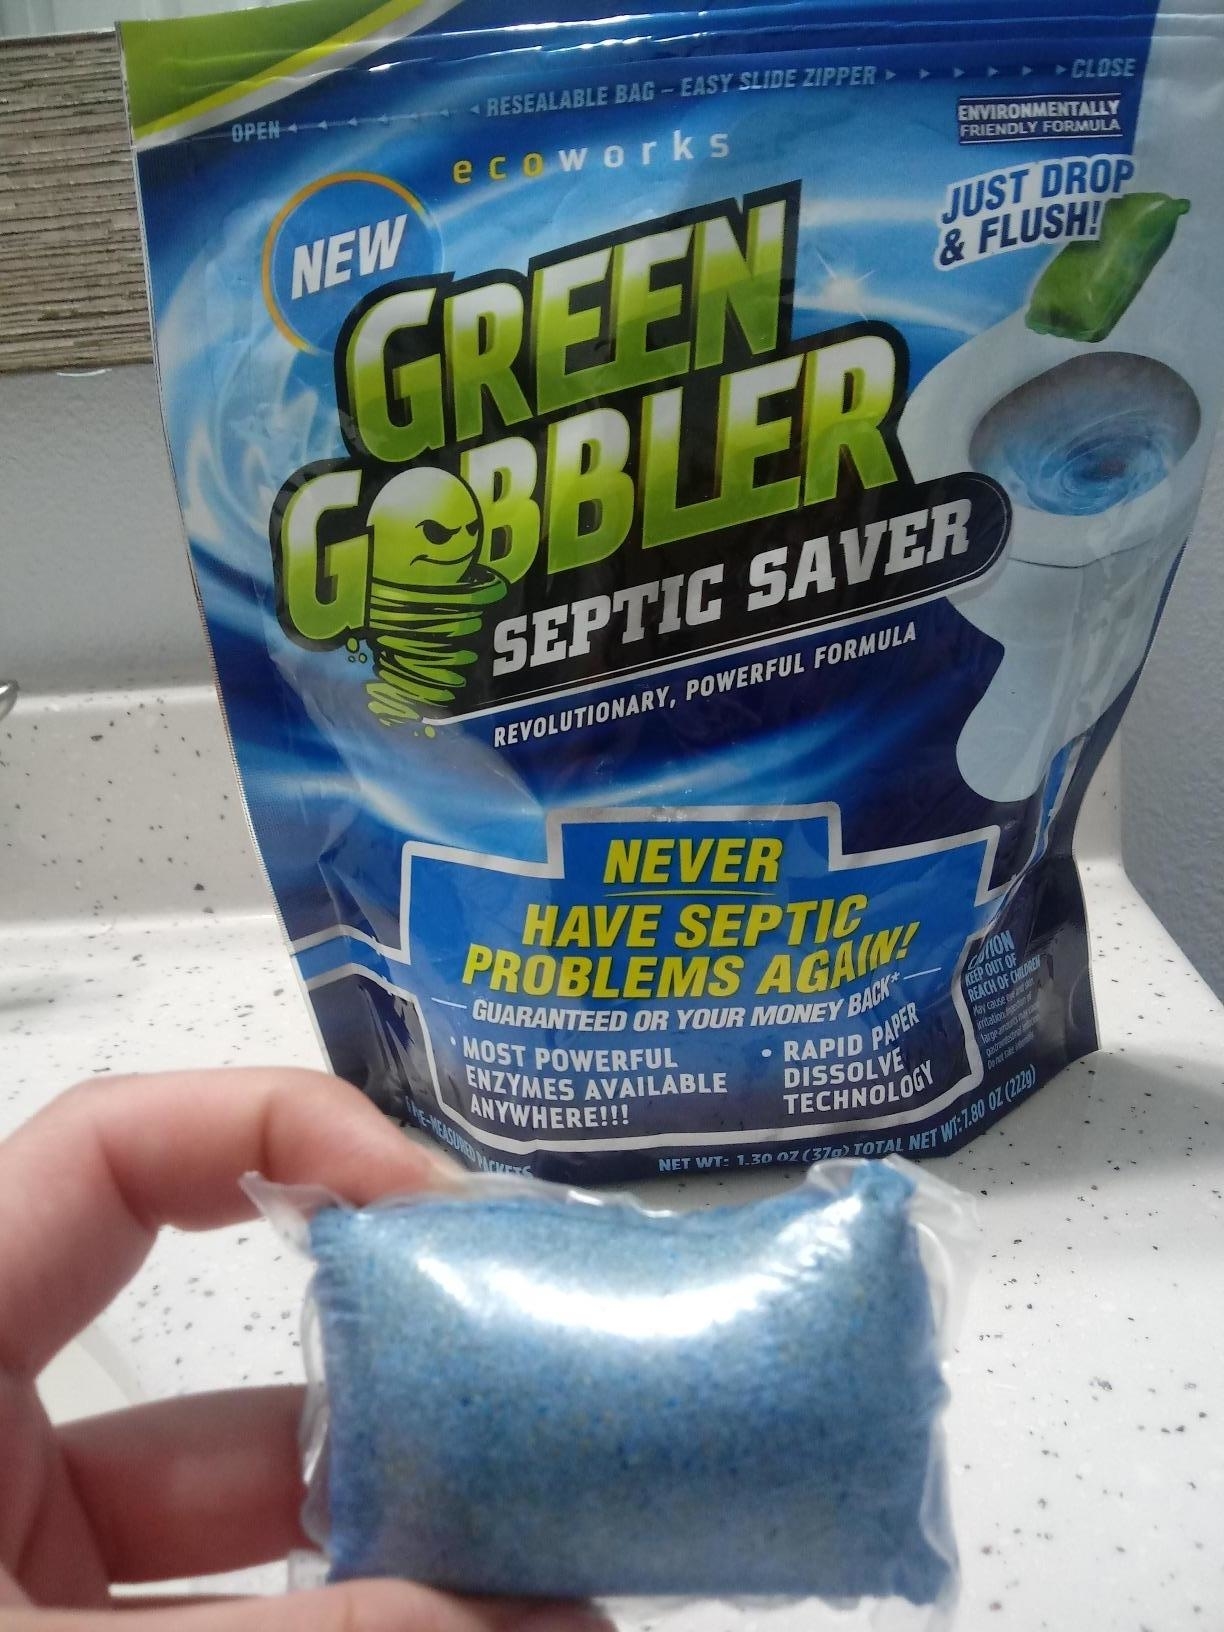 a reviewer photo of a hand holding the blue packet in front of the bag of packaging